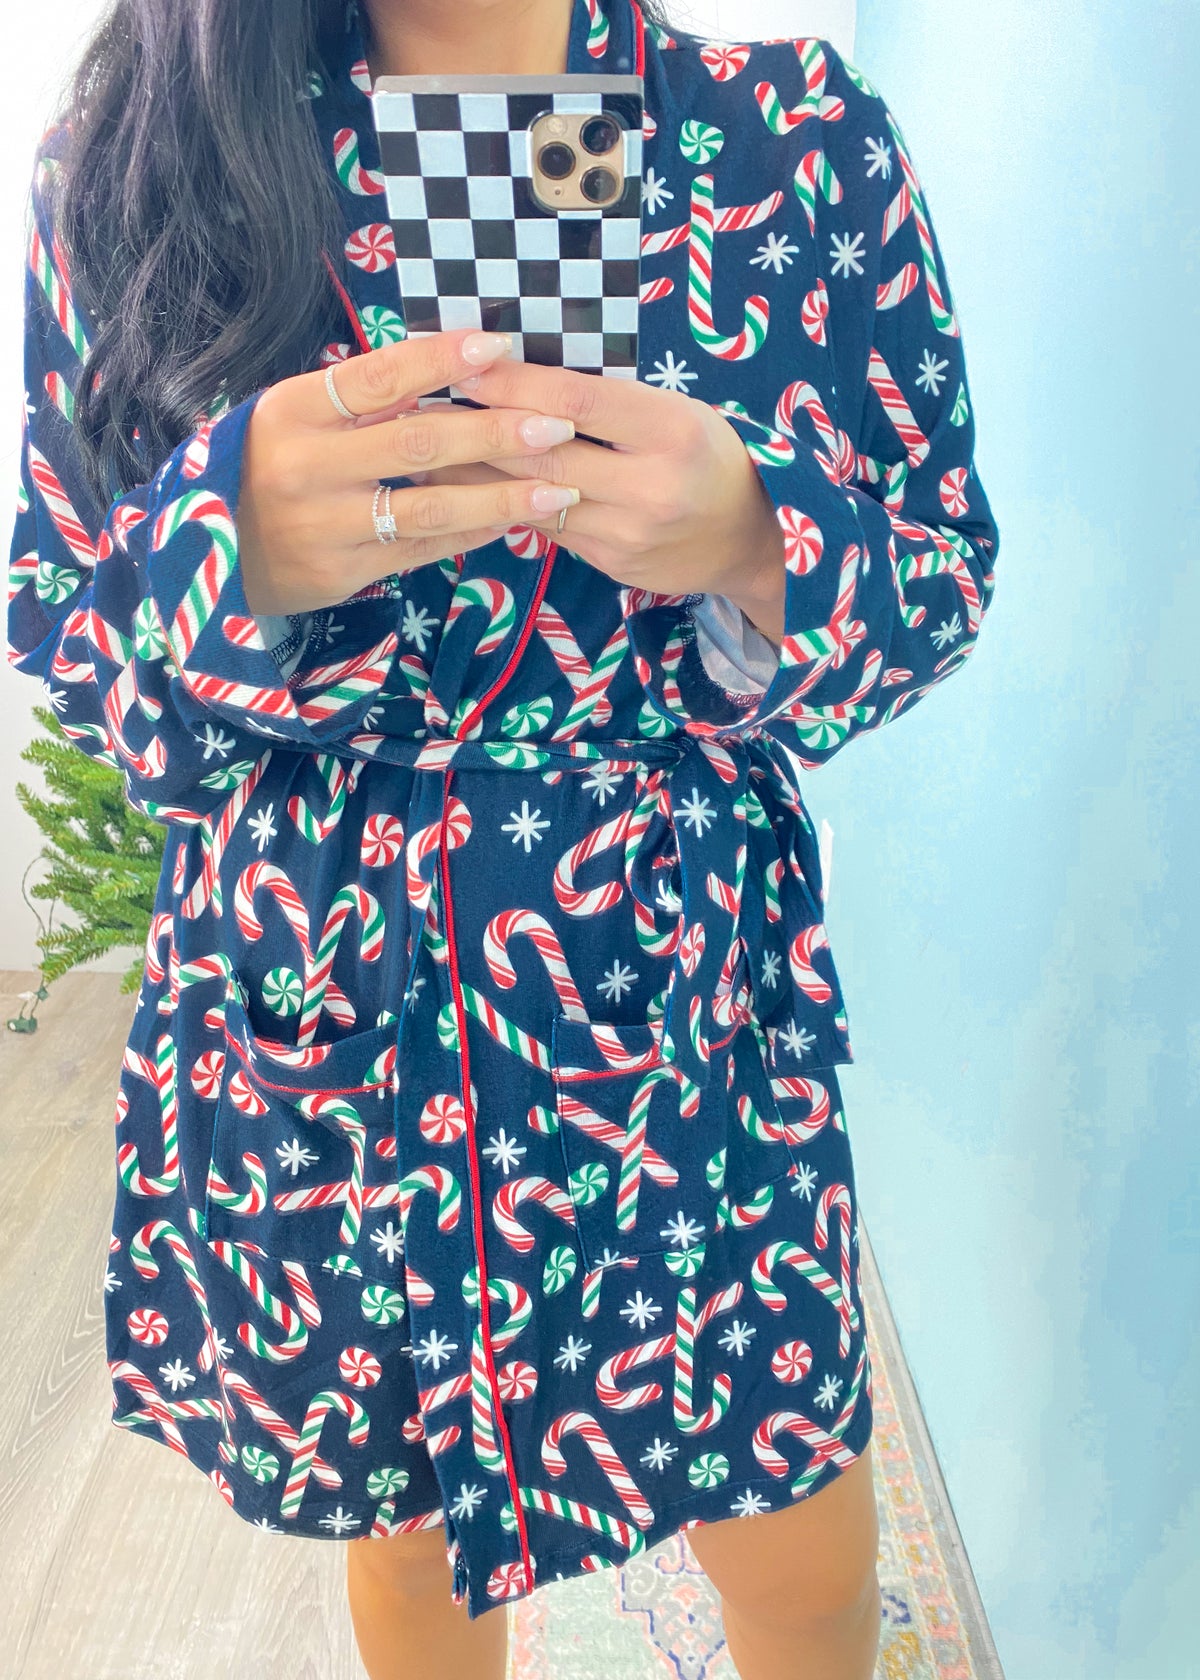 'Candy Cane Lane' Navy Candy Cane Print Lightweight PJ Robe-Stay cozy and super cute all Holiday season and beyond in this comfy lightweight knit robe that has an adorable candy cane & peppermint print! The perfect robe to wear around over your pajamas and while getting ready.-Cali Moon Boutique, Plainville Connecticut